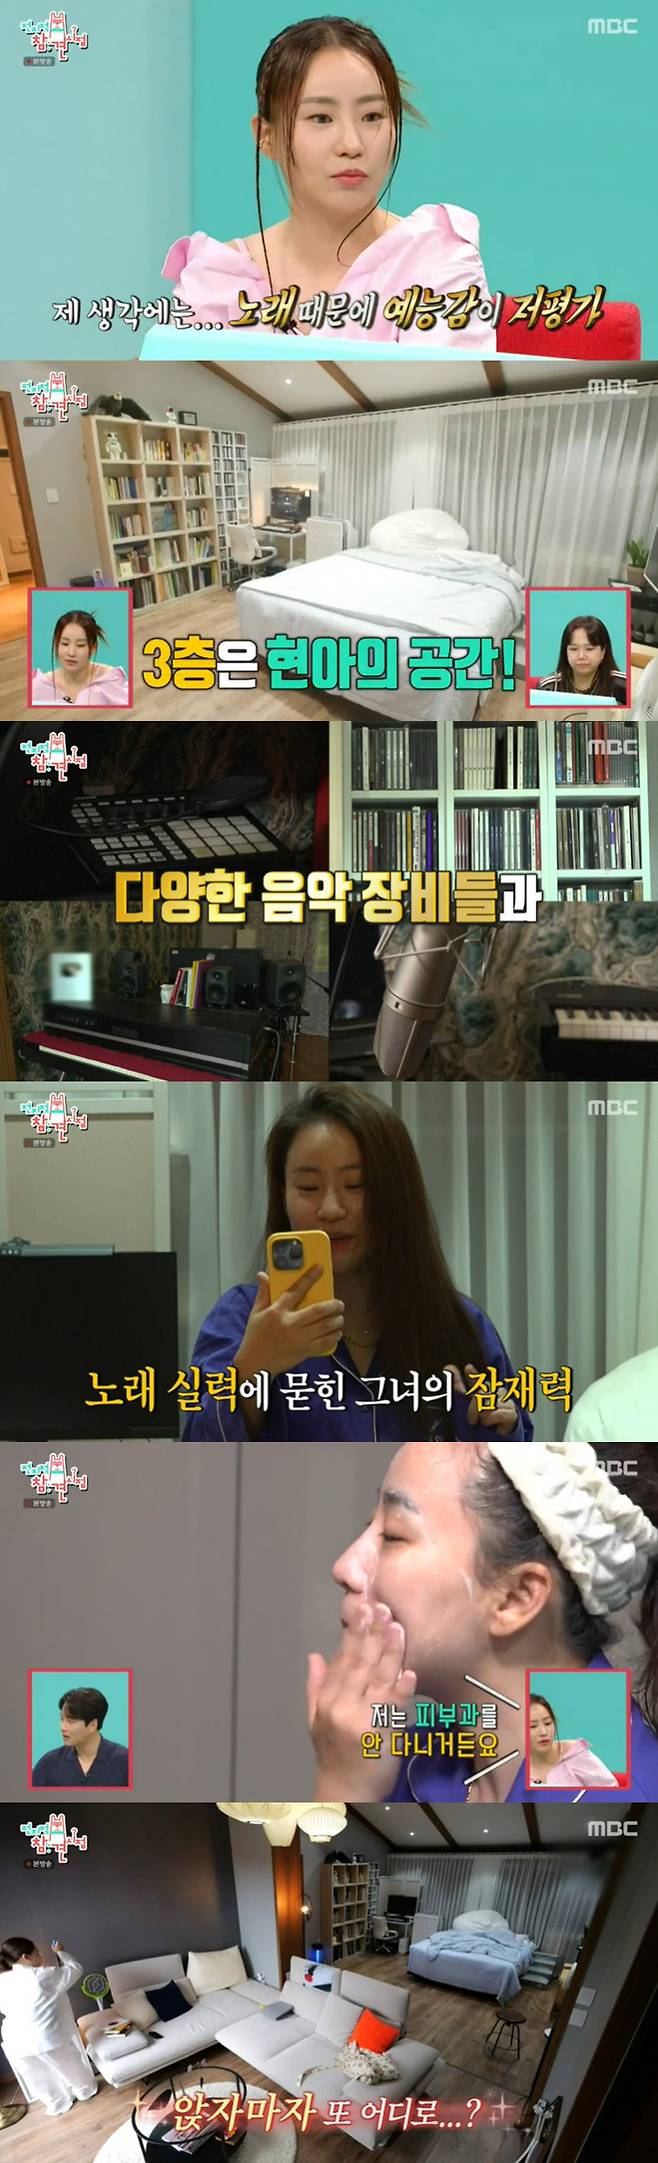 Point of Omniscient Interfere Jo Hyun Ah unveiled his magnificent Namyangju home.On the 12th MBC entertainment program Point of Omniscient Interferee, the daily life of singer Jo Hyun Ah was revealed.Jo Hyun Ah opened his eyes in a spacious bedroom. Jo Hyun Ah was staying with his family at his home in Namyangju, which was called up to 5,000 pyeong. The second floor was used by his family and the third floor was Jo Hyun Ahs space.On one side of the bedroom was a sofa space, and on the other side of the living room was a studio and a photographer of Thursday Night of Jo Hyun Ah.Jo Hyun Ahs 10-year-old manager said, Jo Hyun Ah likes to meet people and is a superb E.I have never seen a house, but I want to look at it. After the video call, Jo Hyun Ah meticulously washed his face. Yang Se-hyeong said, You value your skin immensely, and Jo Hyun Ah said, I dont go to a dermatologist. Skin care is not done.Jo Hyun Ah said, I apply a lot of sunscreen. I applied sunscreen to my face and constantly muttered and finished self-skin care.Jo Hyun Ah. Jo Hyun Ah picked up Xero drinks from the refrigerator and read a book. Jo Hyun Ah said, I do not like chewing.I am in the best condition when I am on an empty stomach, he said. I hate chicken breasts while exercising. I keep eating Xero drinks because I do not eat them. I drink about 10 bottles a day.Jo Hyun Ah. Jo Hyun Ah, who opened his eyes, turned into a piano and hit the piano. Jo Hyun Ah writes a song to overcome Breakup. All experience is property.Breakup, love, pain, hurt. A lot of wealth.Lee Young-ja asked, Does the song come out of the breakup experience of others? Jo Hyun Ah made a song on the spot with Yang Se-hyeongs breakup experience.Jo Hyun Ah, wearing an umbrella and a raincoat, came out and went to the backyard. Jo Hyun Ah, wearing an umbrella, ran a lunge, ran a long distance, and burned his passion.Manager came to Jo Hyun Ahs house. Jo Hyun Ah and Manager decided to have a picnic. Manager said, At the end of last year, we came out with the company and established a new agency.We are co-representatives, he said.The manager talked about his hair falling out as he got older, and Jo Hyun Ah suddenly showed tears.Jo Hyun Ah, who poured tears in the studio, said, I know everything about me. I have been working with you for over 10 years, trusting me, working with a company, and frankly it was really hard, but yesterday I had a surplus.